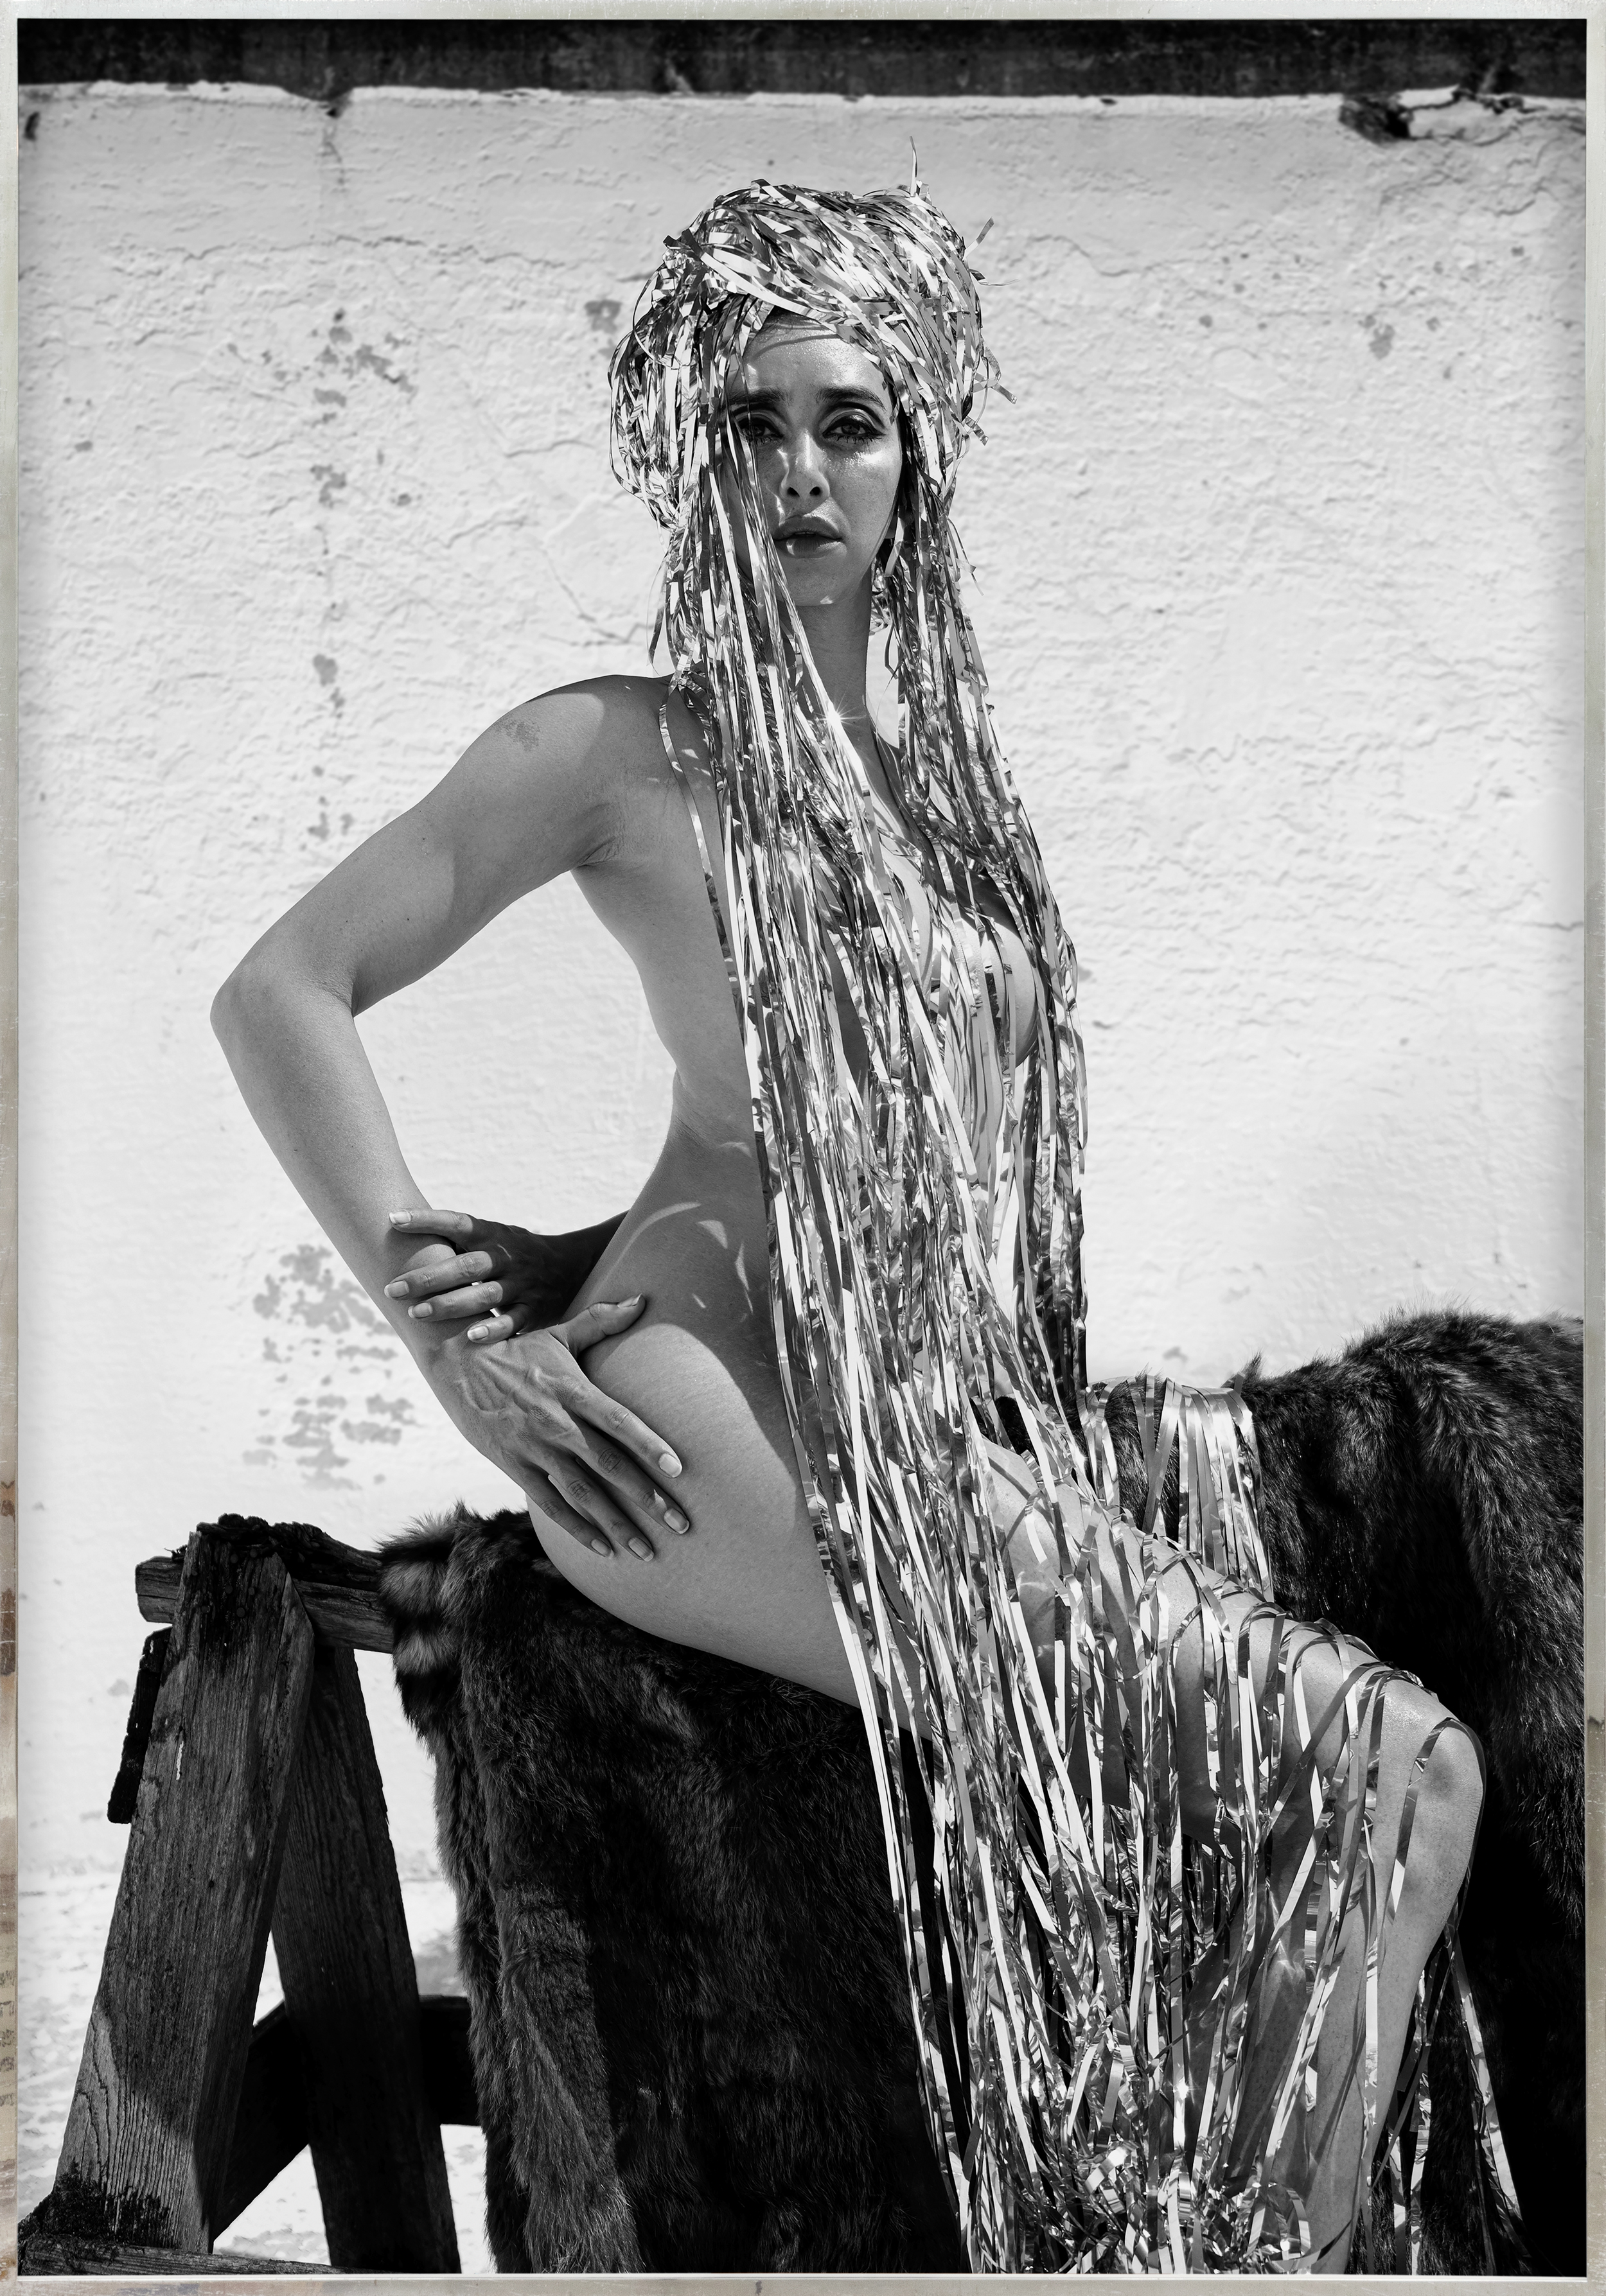 Color image of black and white photograph of a seated figure dressed in a shiny metallic head dress cascading down covering their body framed in a distressed metal